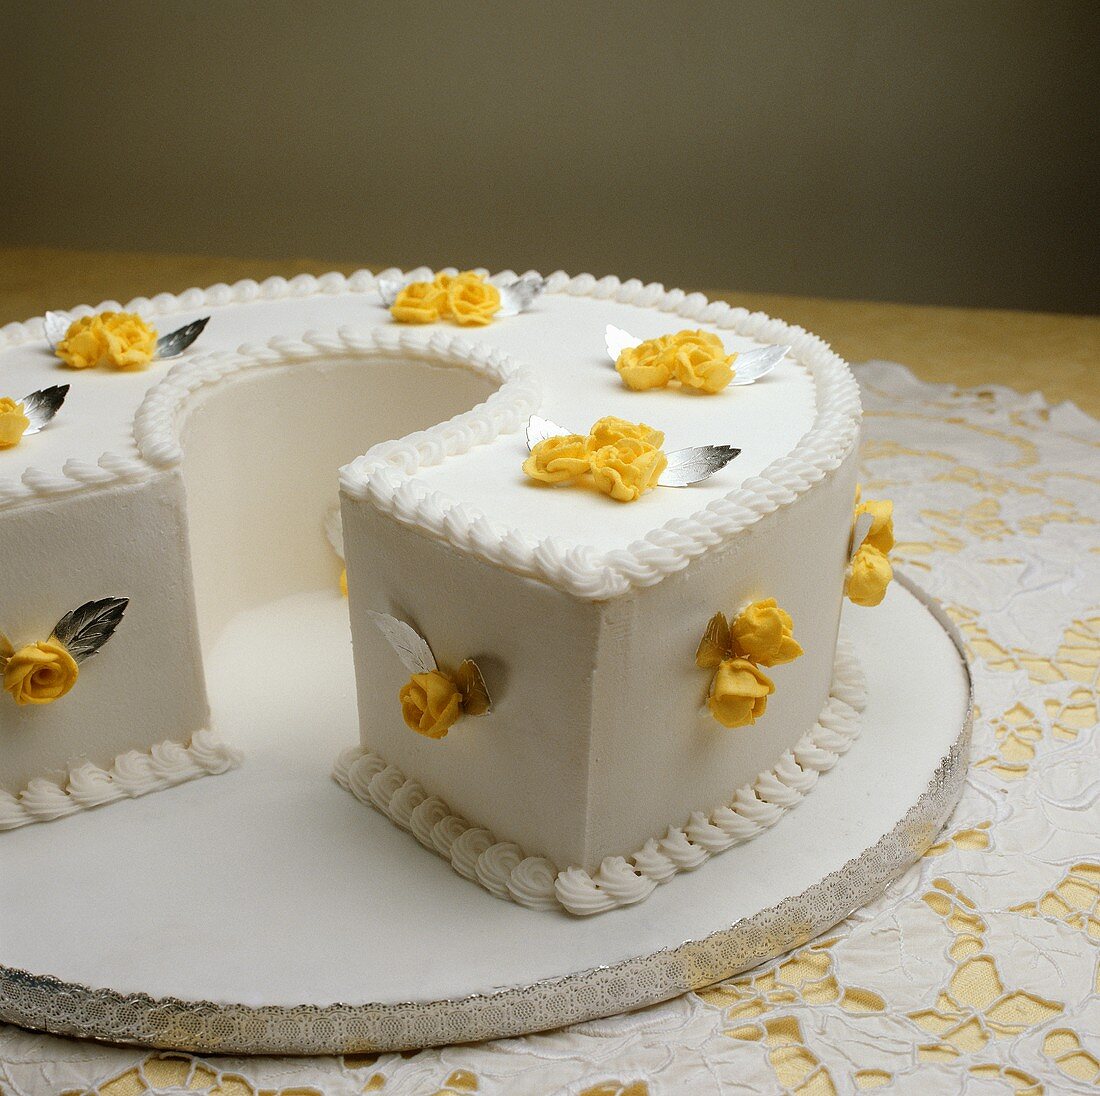 A white cake with yellow sugar roses